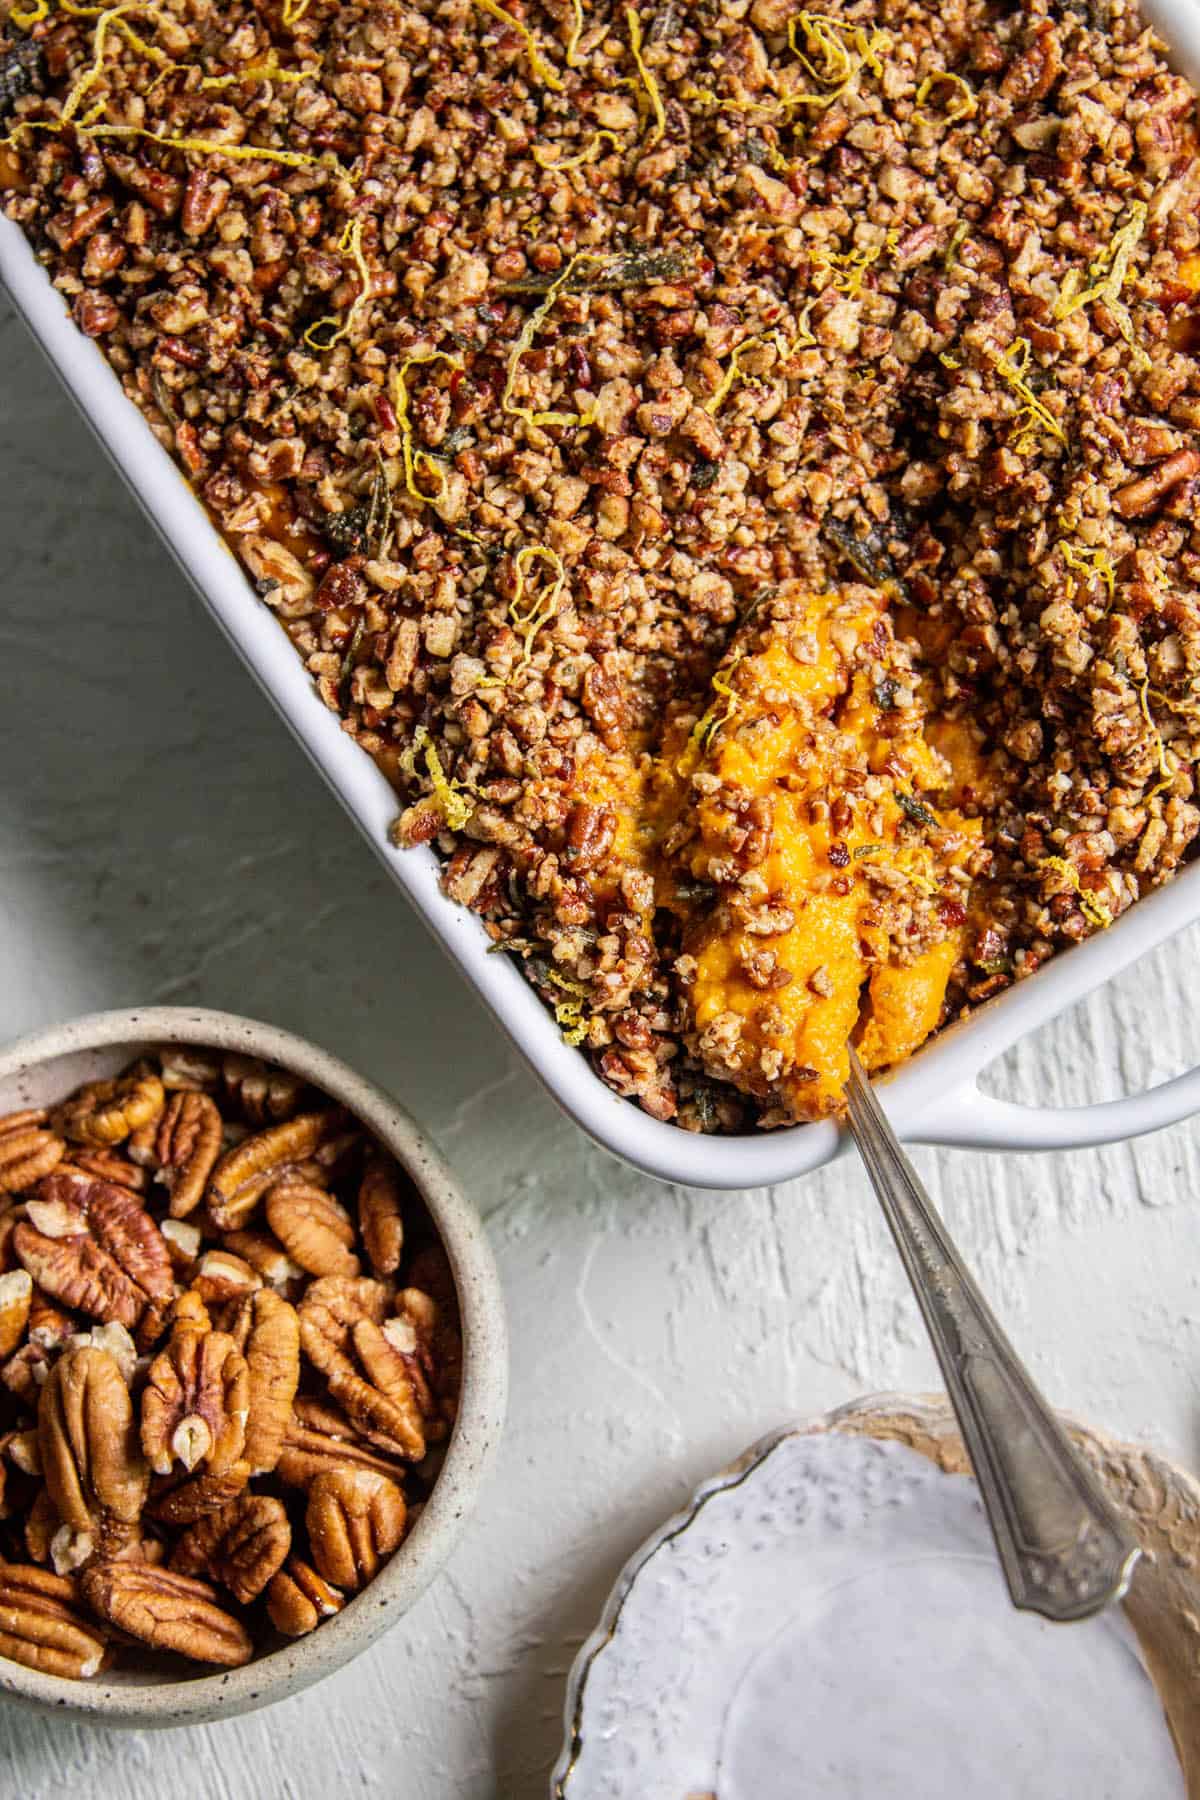 How To Make The Best Sweet Potato Casserole with Pecans